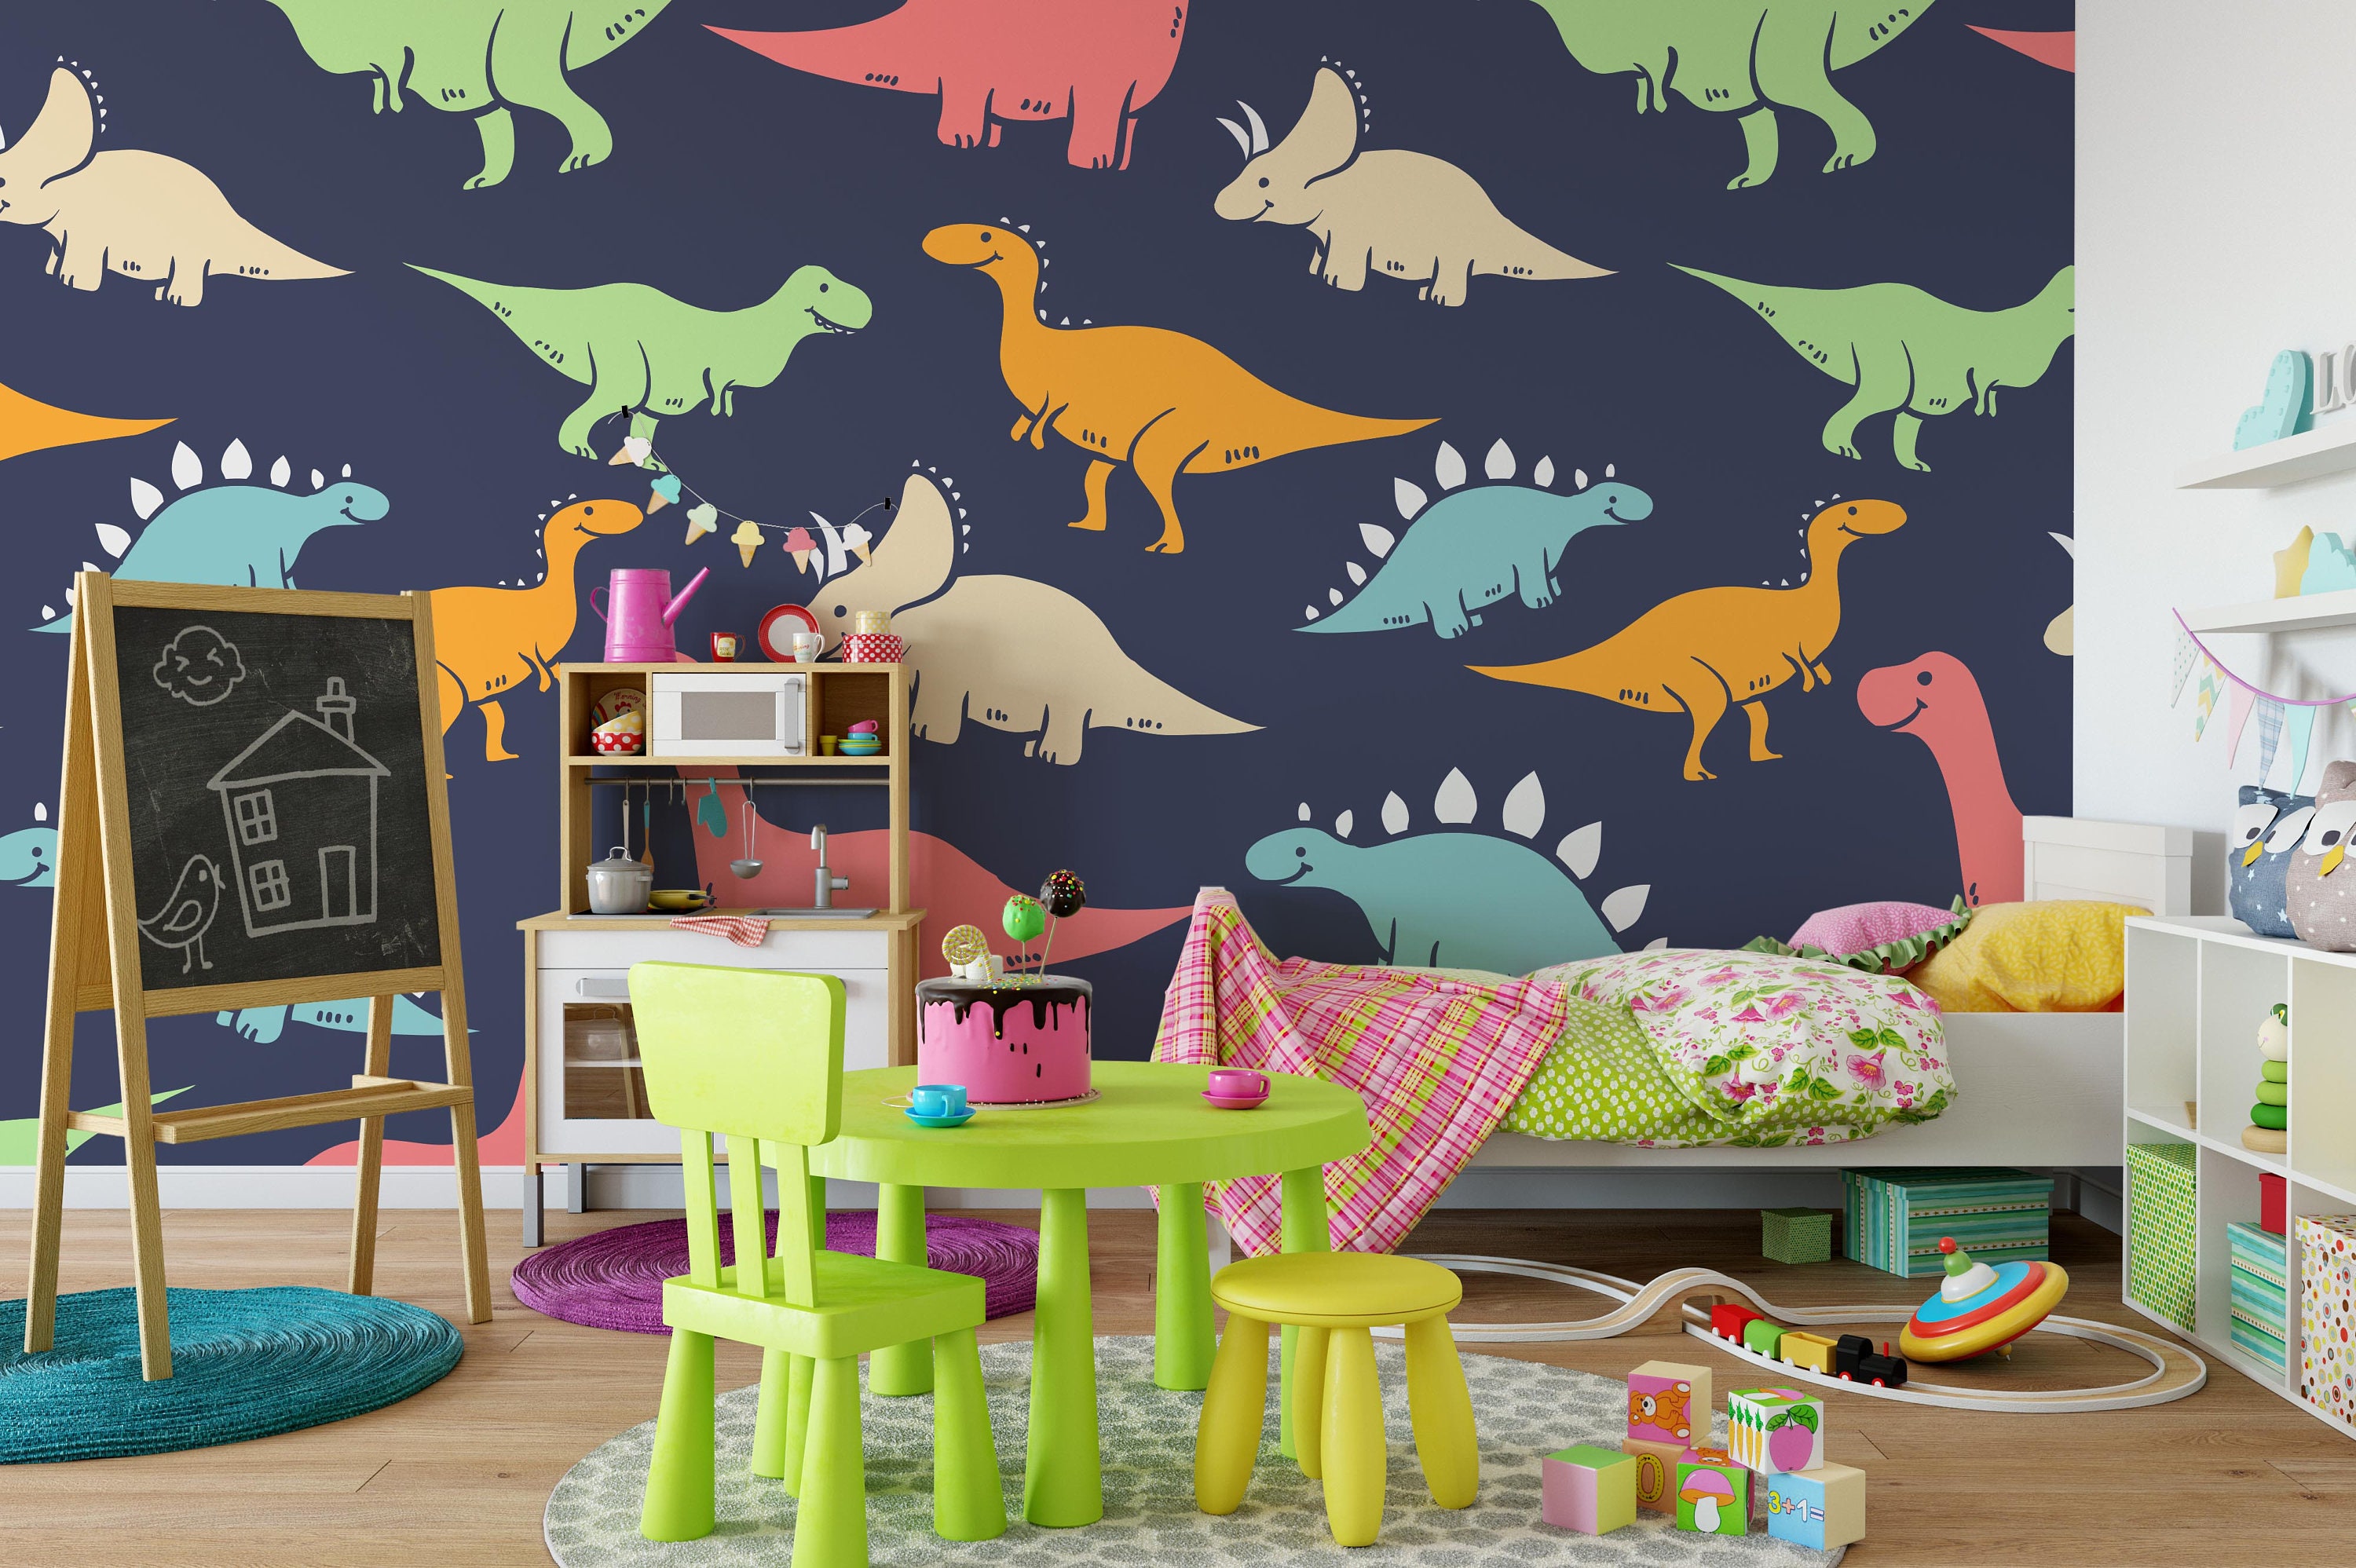 3D Cartoon People Wallpaper Mural Peel and Stick Wallpaper Removable Wall Prints Stickers FC